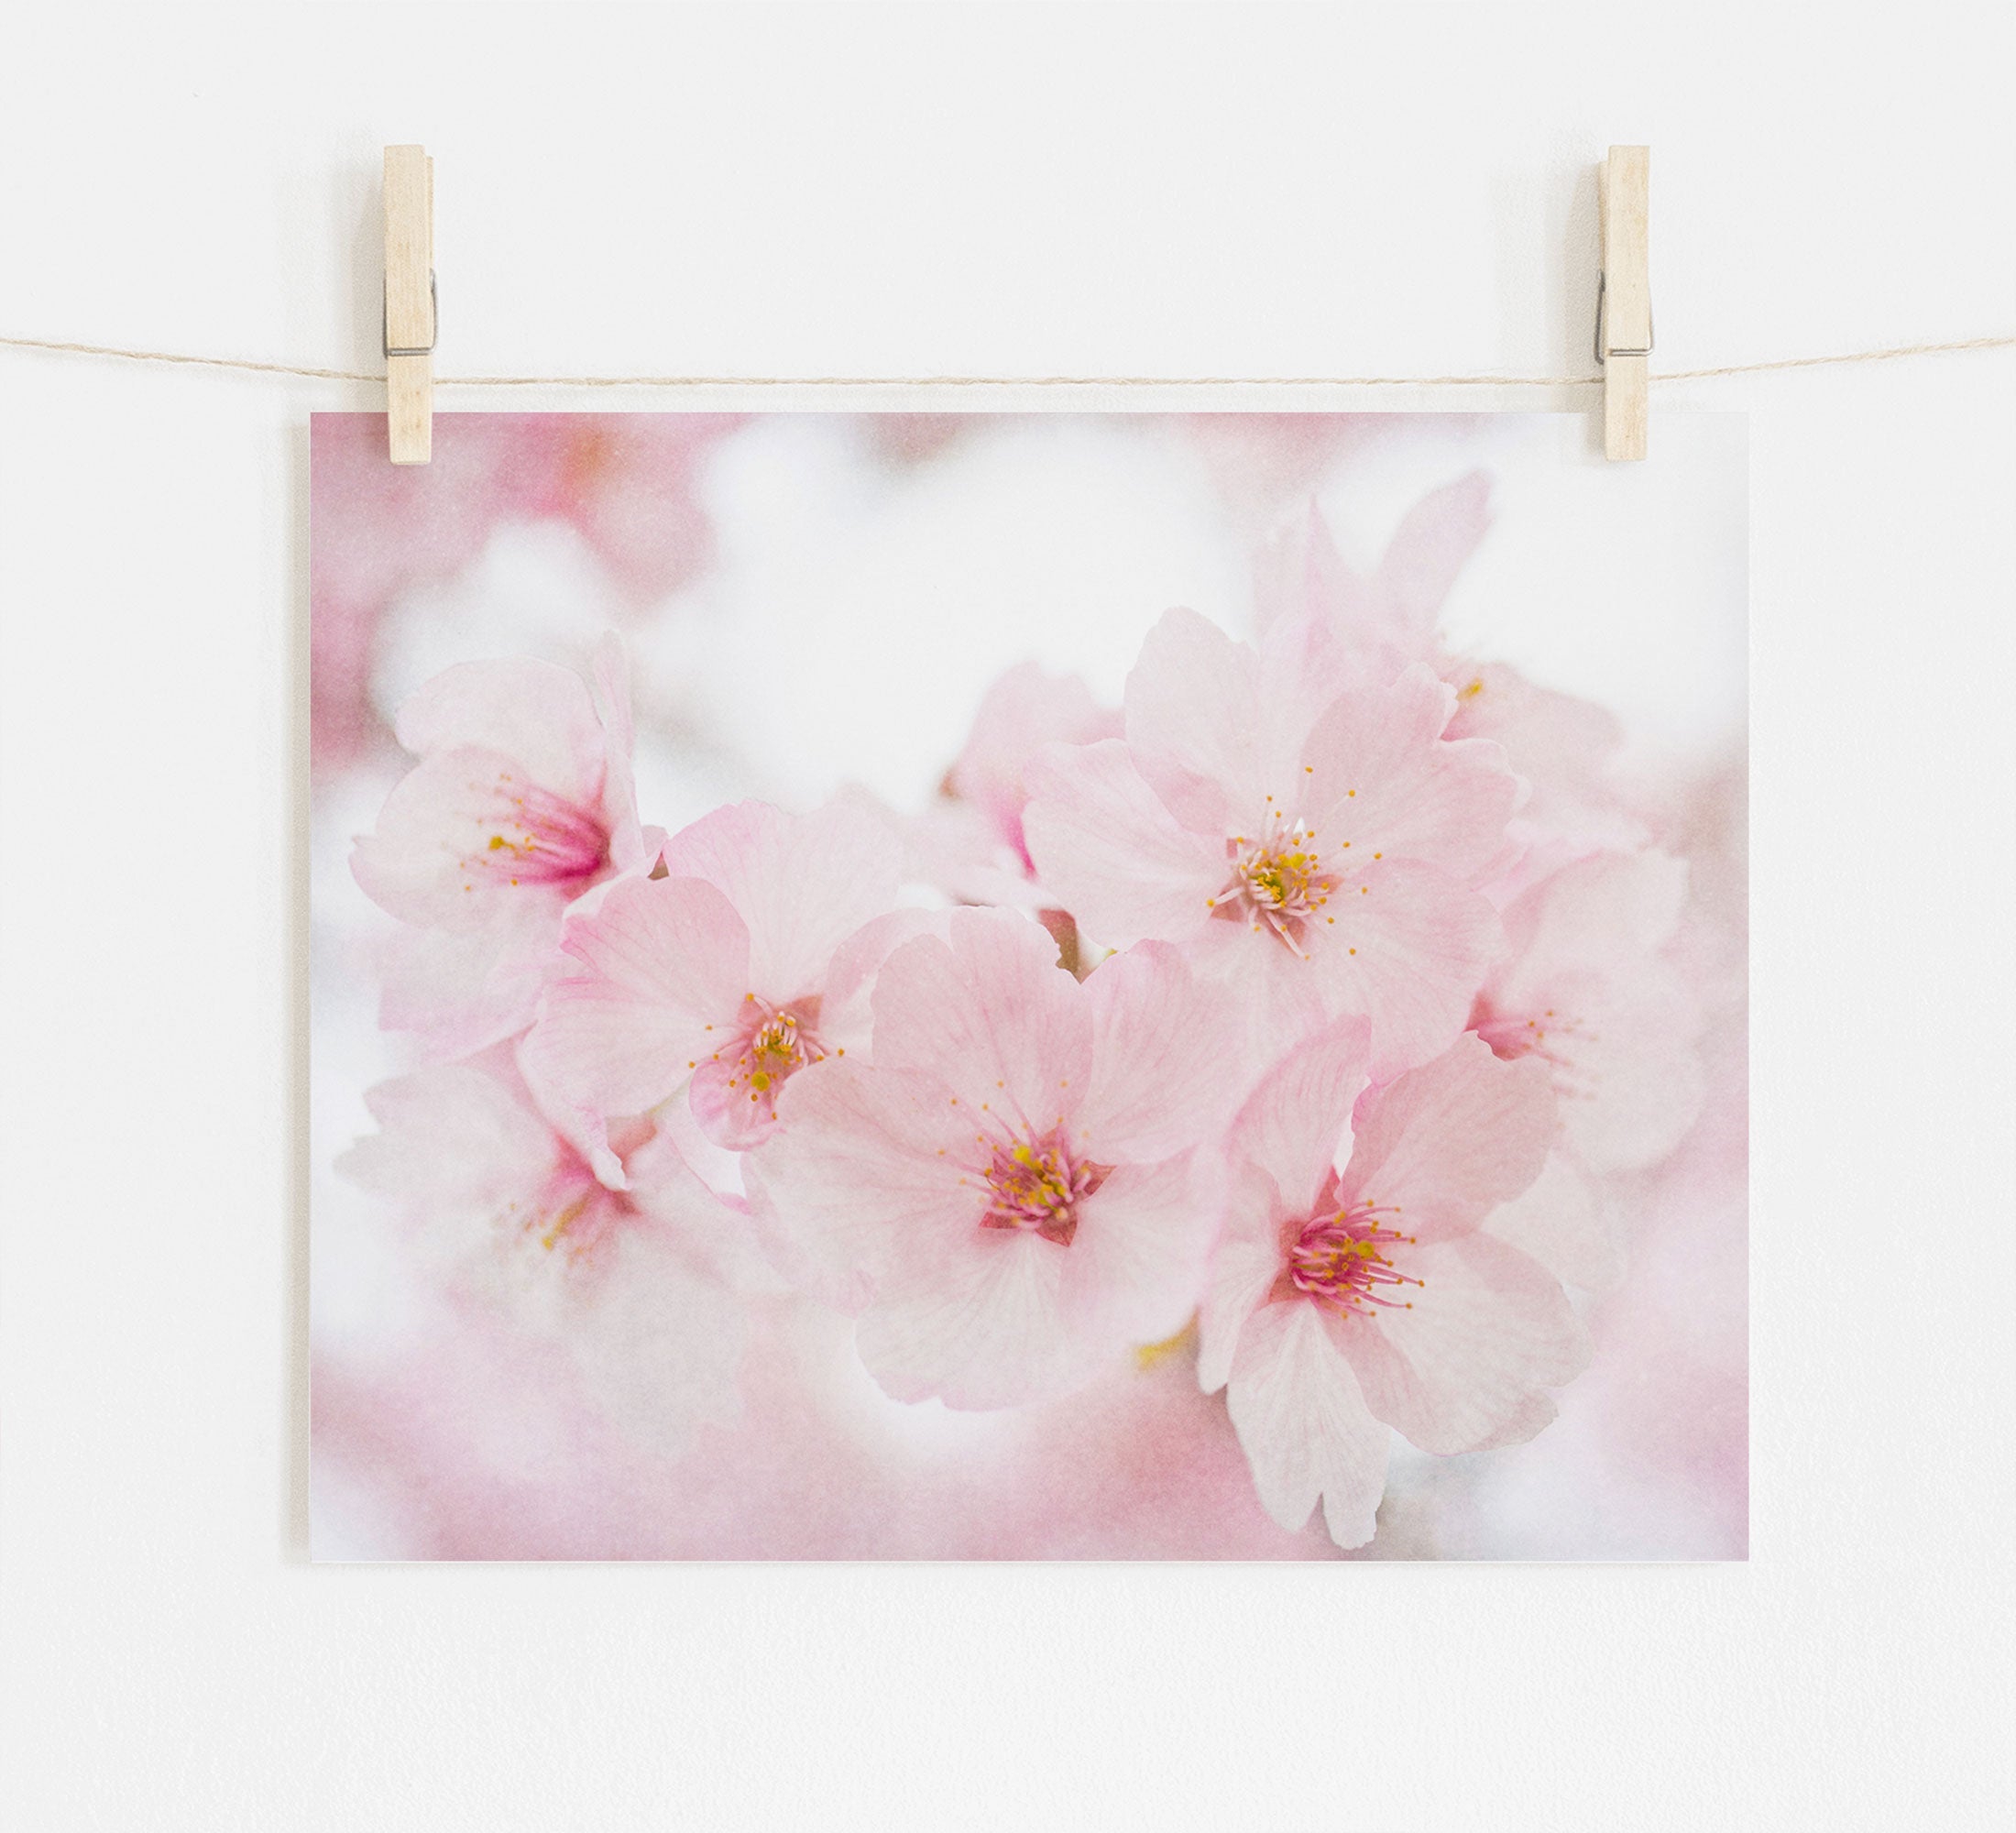 A photo of shabby pink cherry blossoms, Offley Green&#39;s &#39;Cherry Blossom&#39; print, is clipped to a string by two wooden clothespins against a white wall. The image captures the delicate texture and soft color of the blooms.